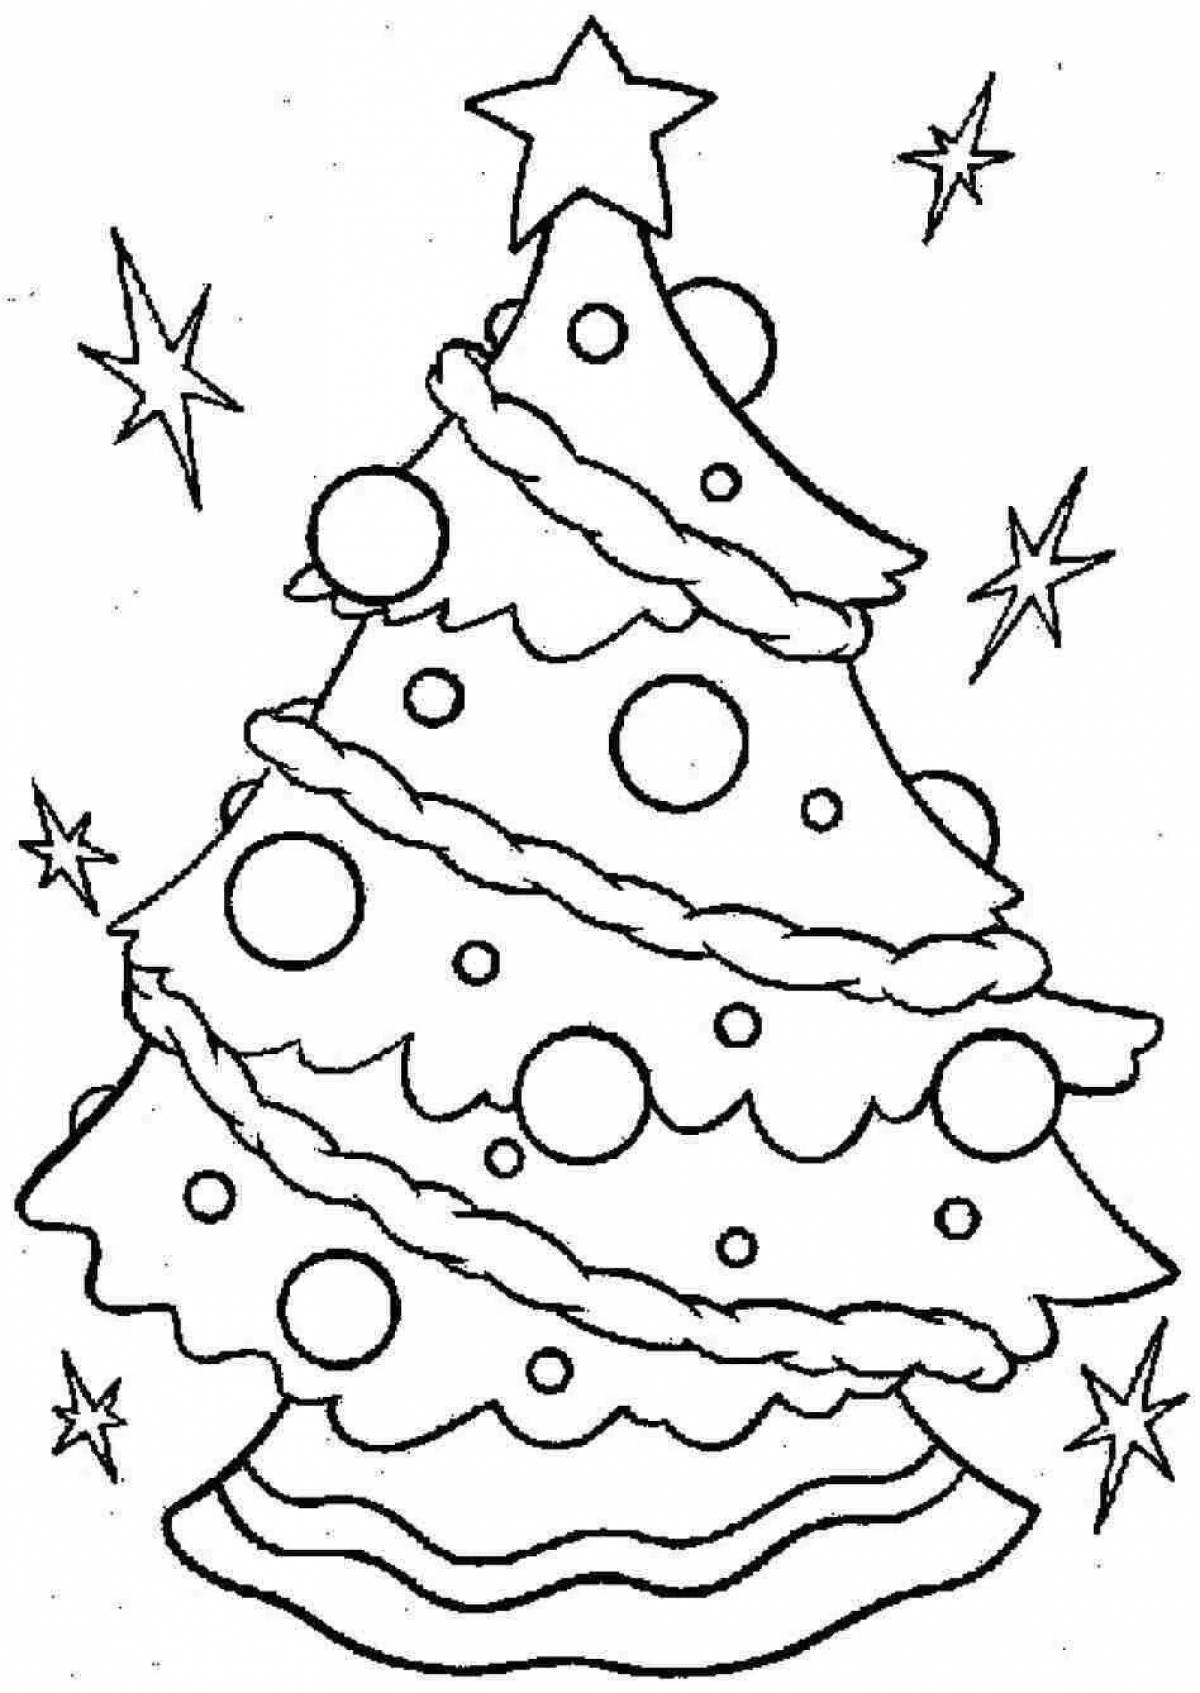 Shining Christmas tree coloring book for 5-6 year olds